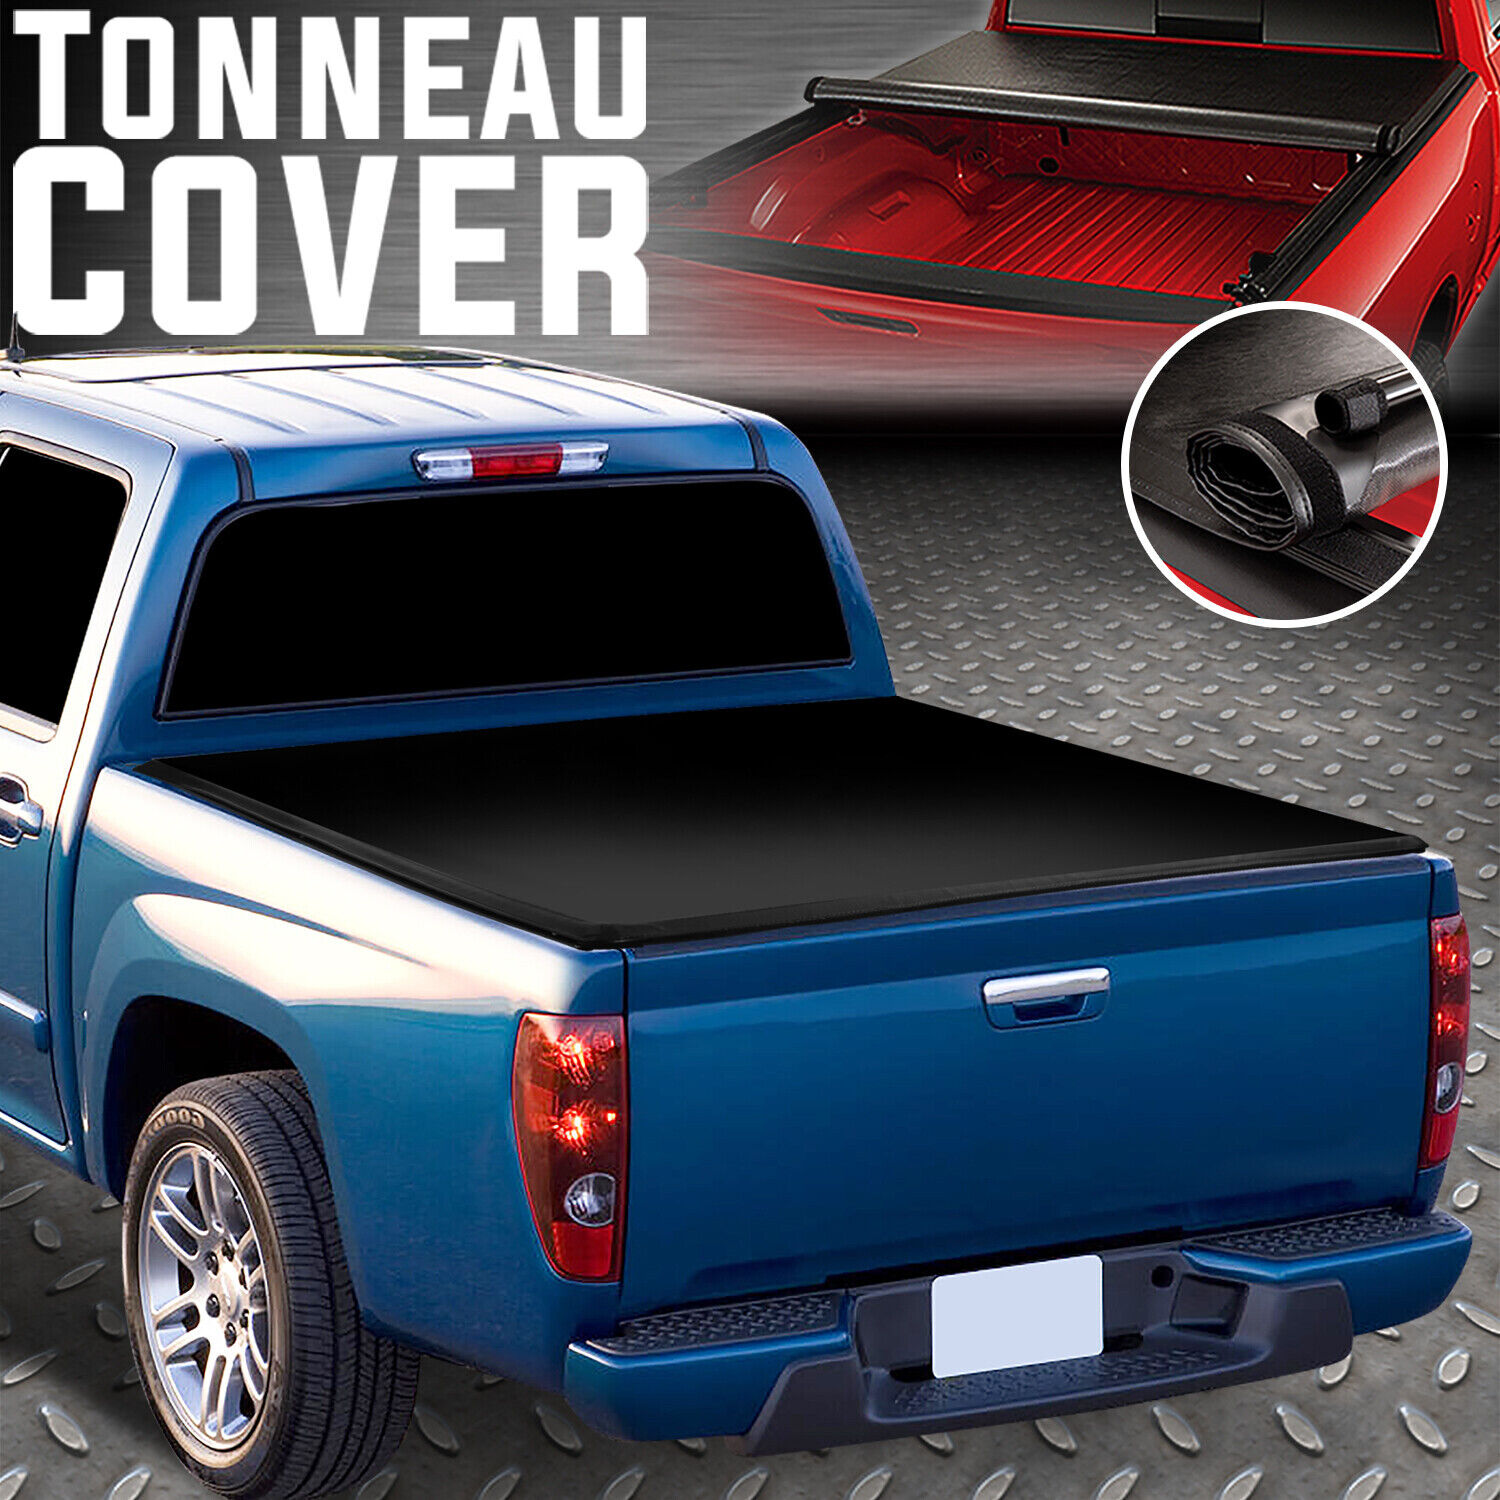 FOR 2004-2012 COLORADO/CANYON 6FT TRUCK BED SOFT VINYL ROLL-UP TONNEAU COVER